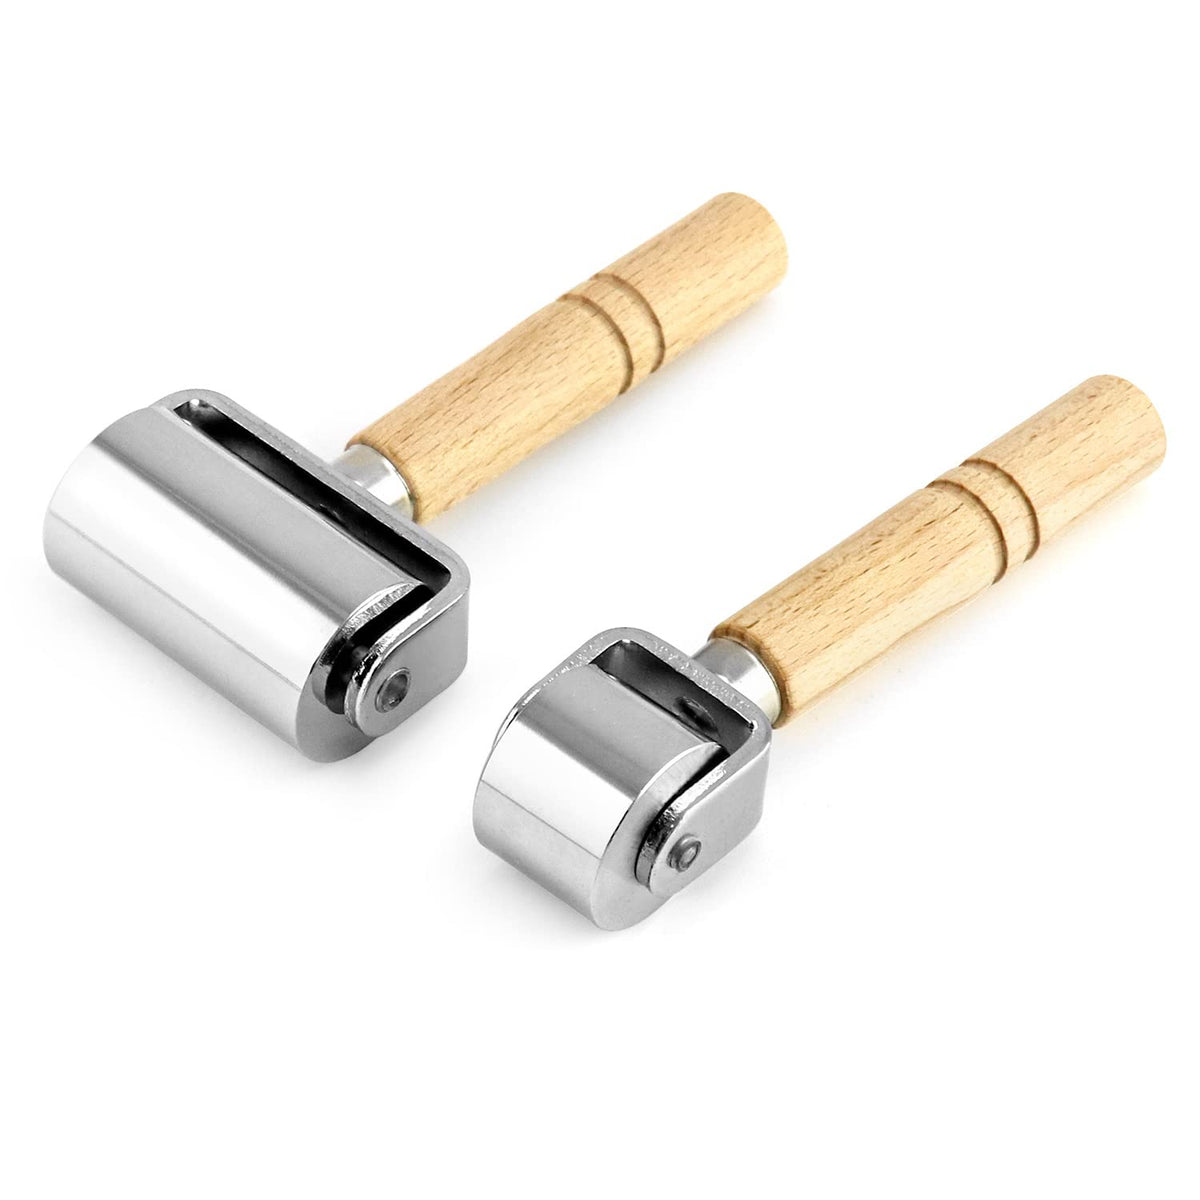 Leather Texture Roller and Frame - ToolPro